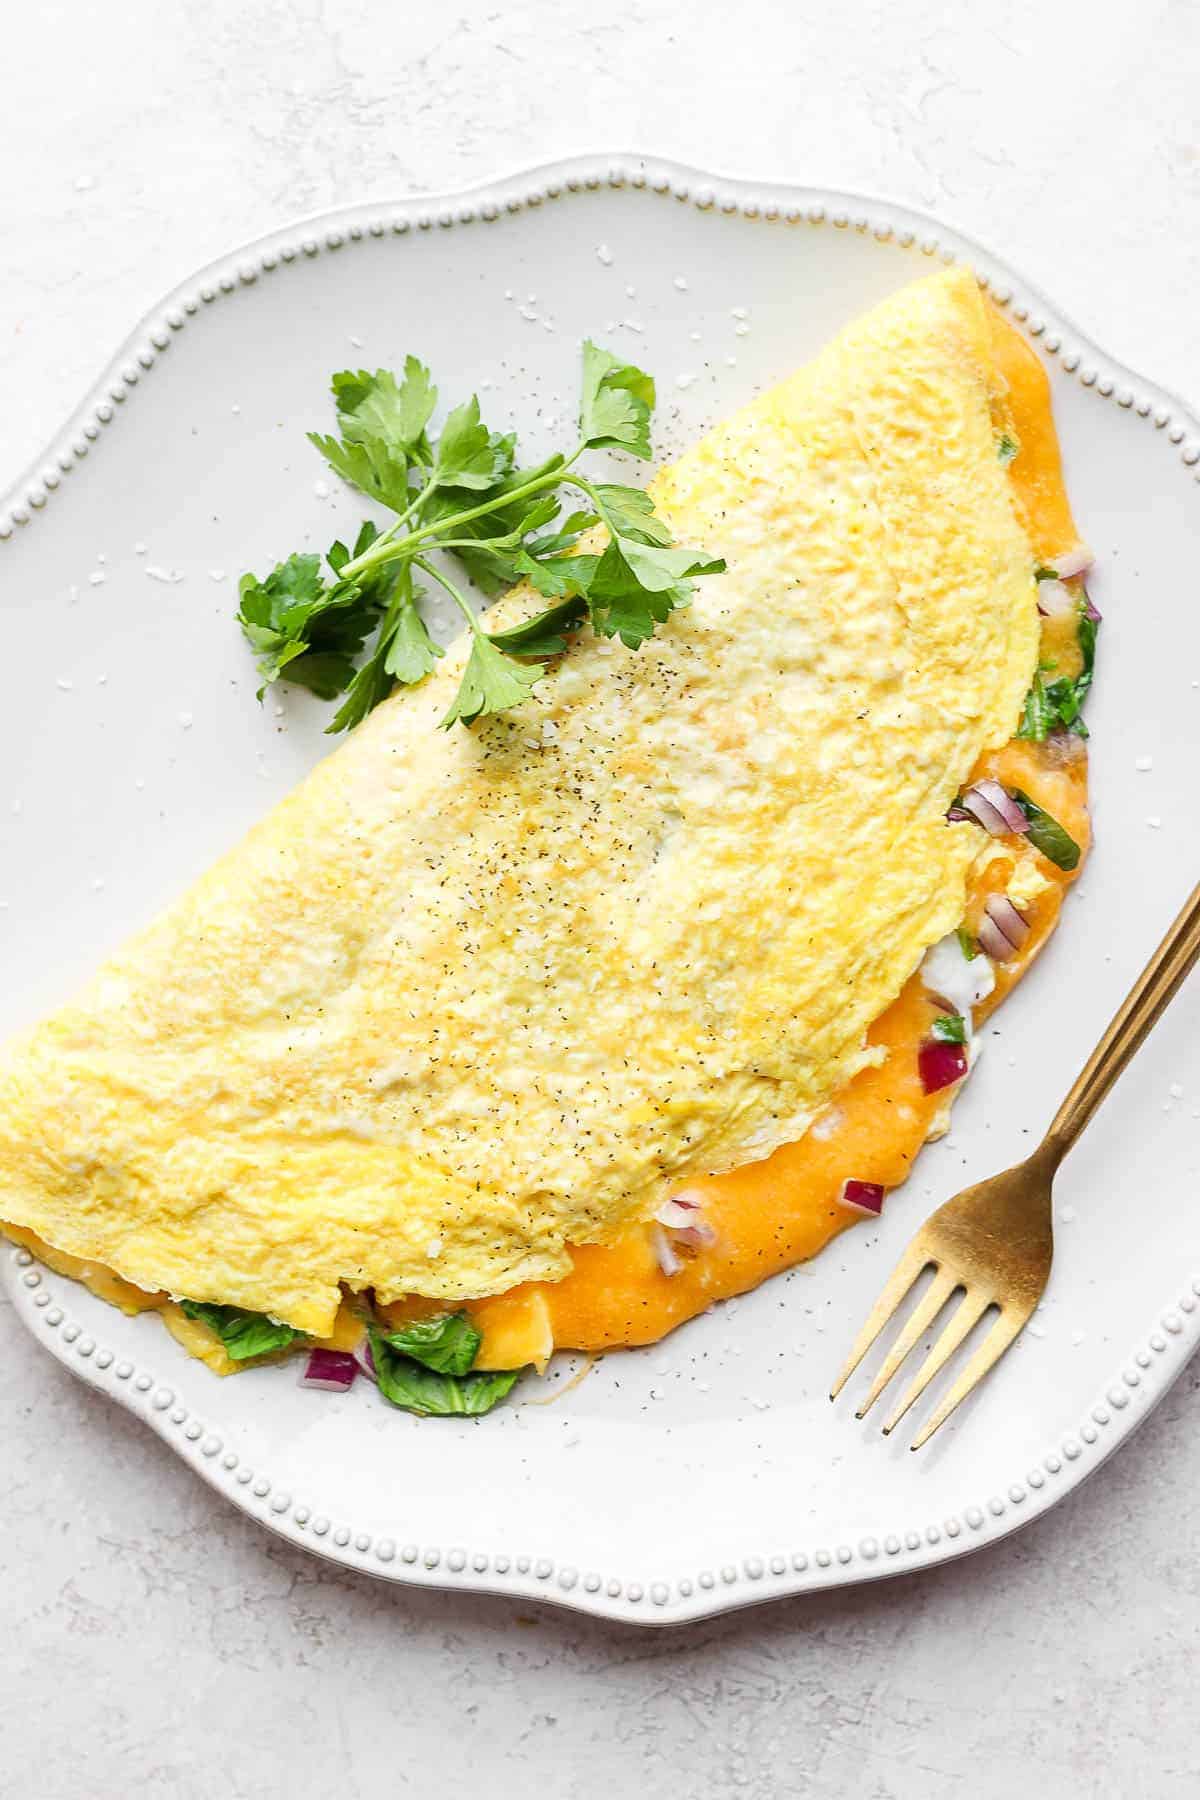 How to Make a Cheesy Omelette - FeelGoodFoodie